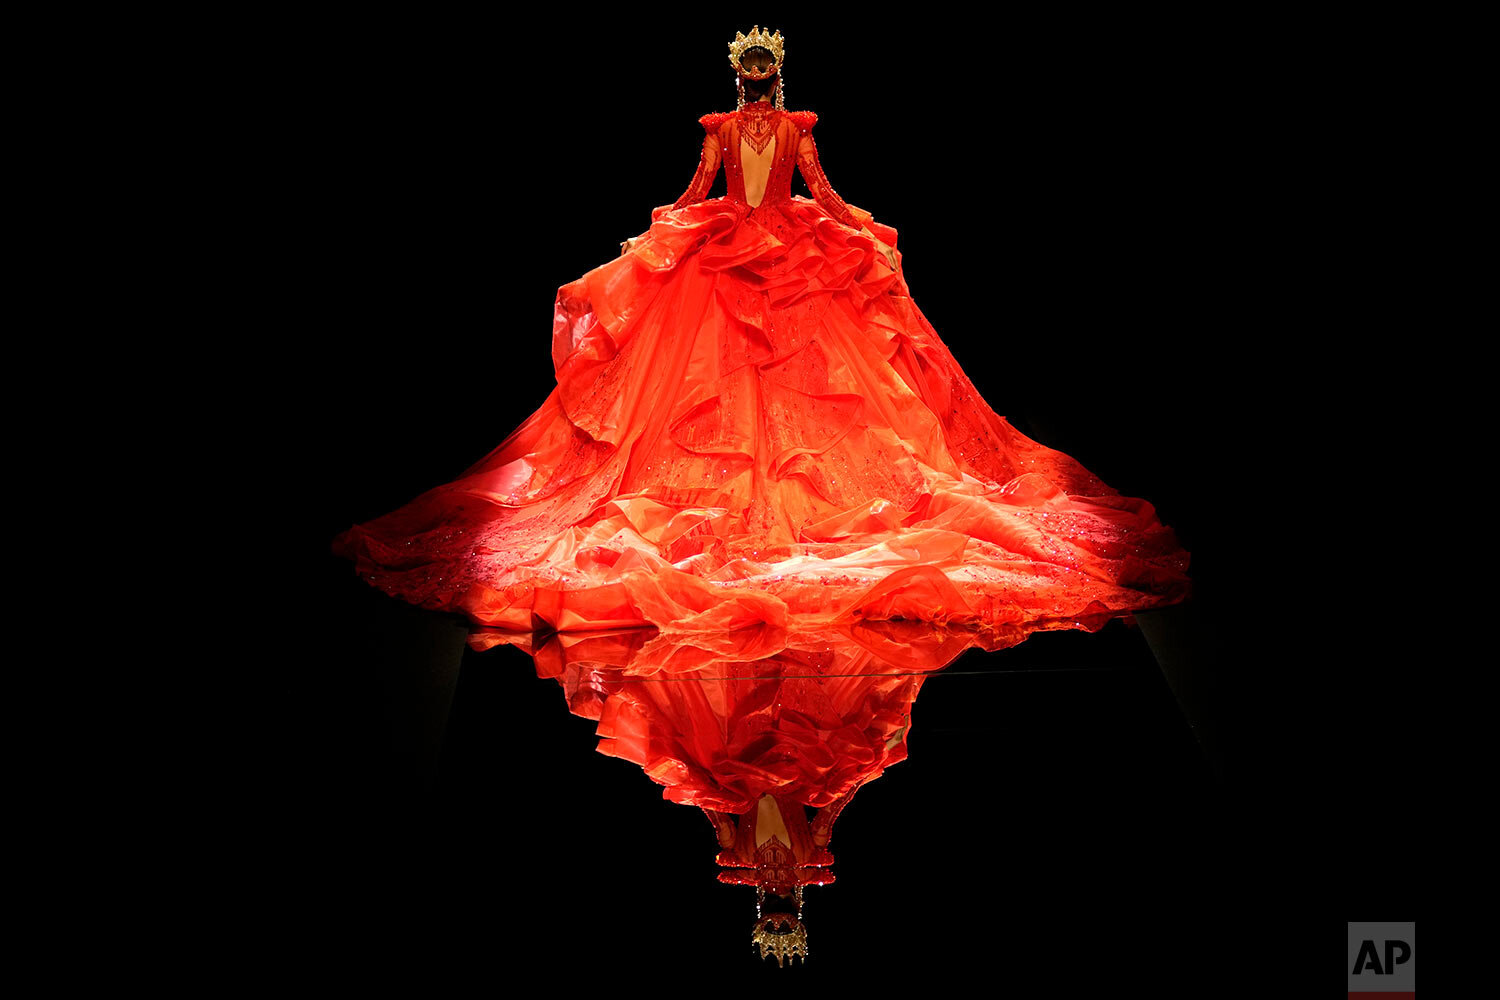  A model presents a gown from the William Zhang collection by designer Hongwei Zhang during the China Fashion Week held in Beijing, China, Wednesday, Sept. 8, 2021. (AP Photo/Ng Han Guan) 